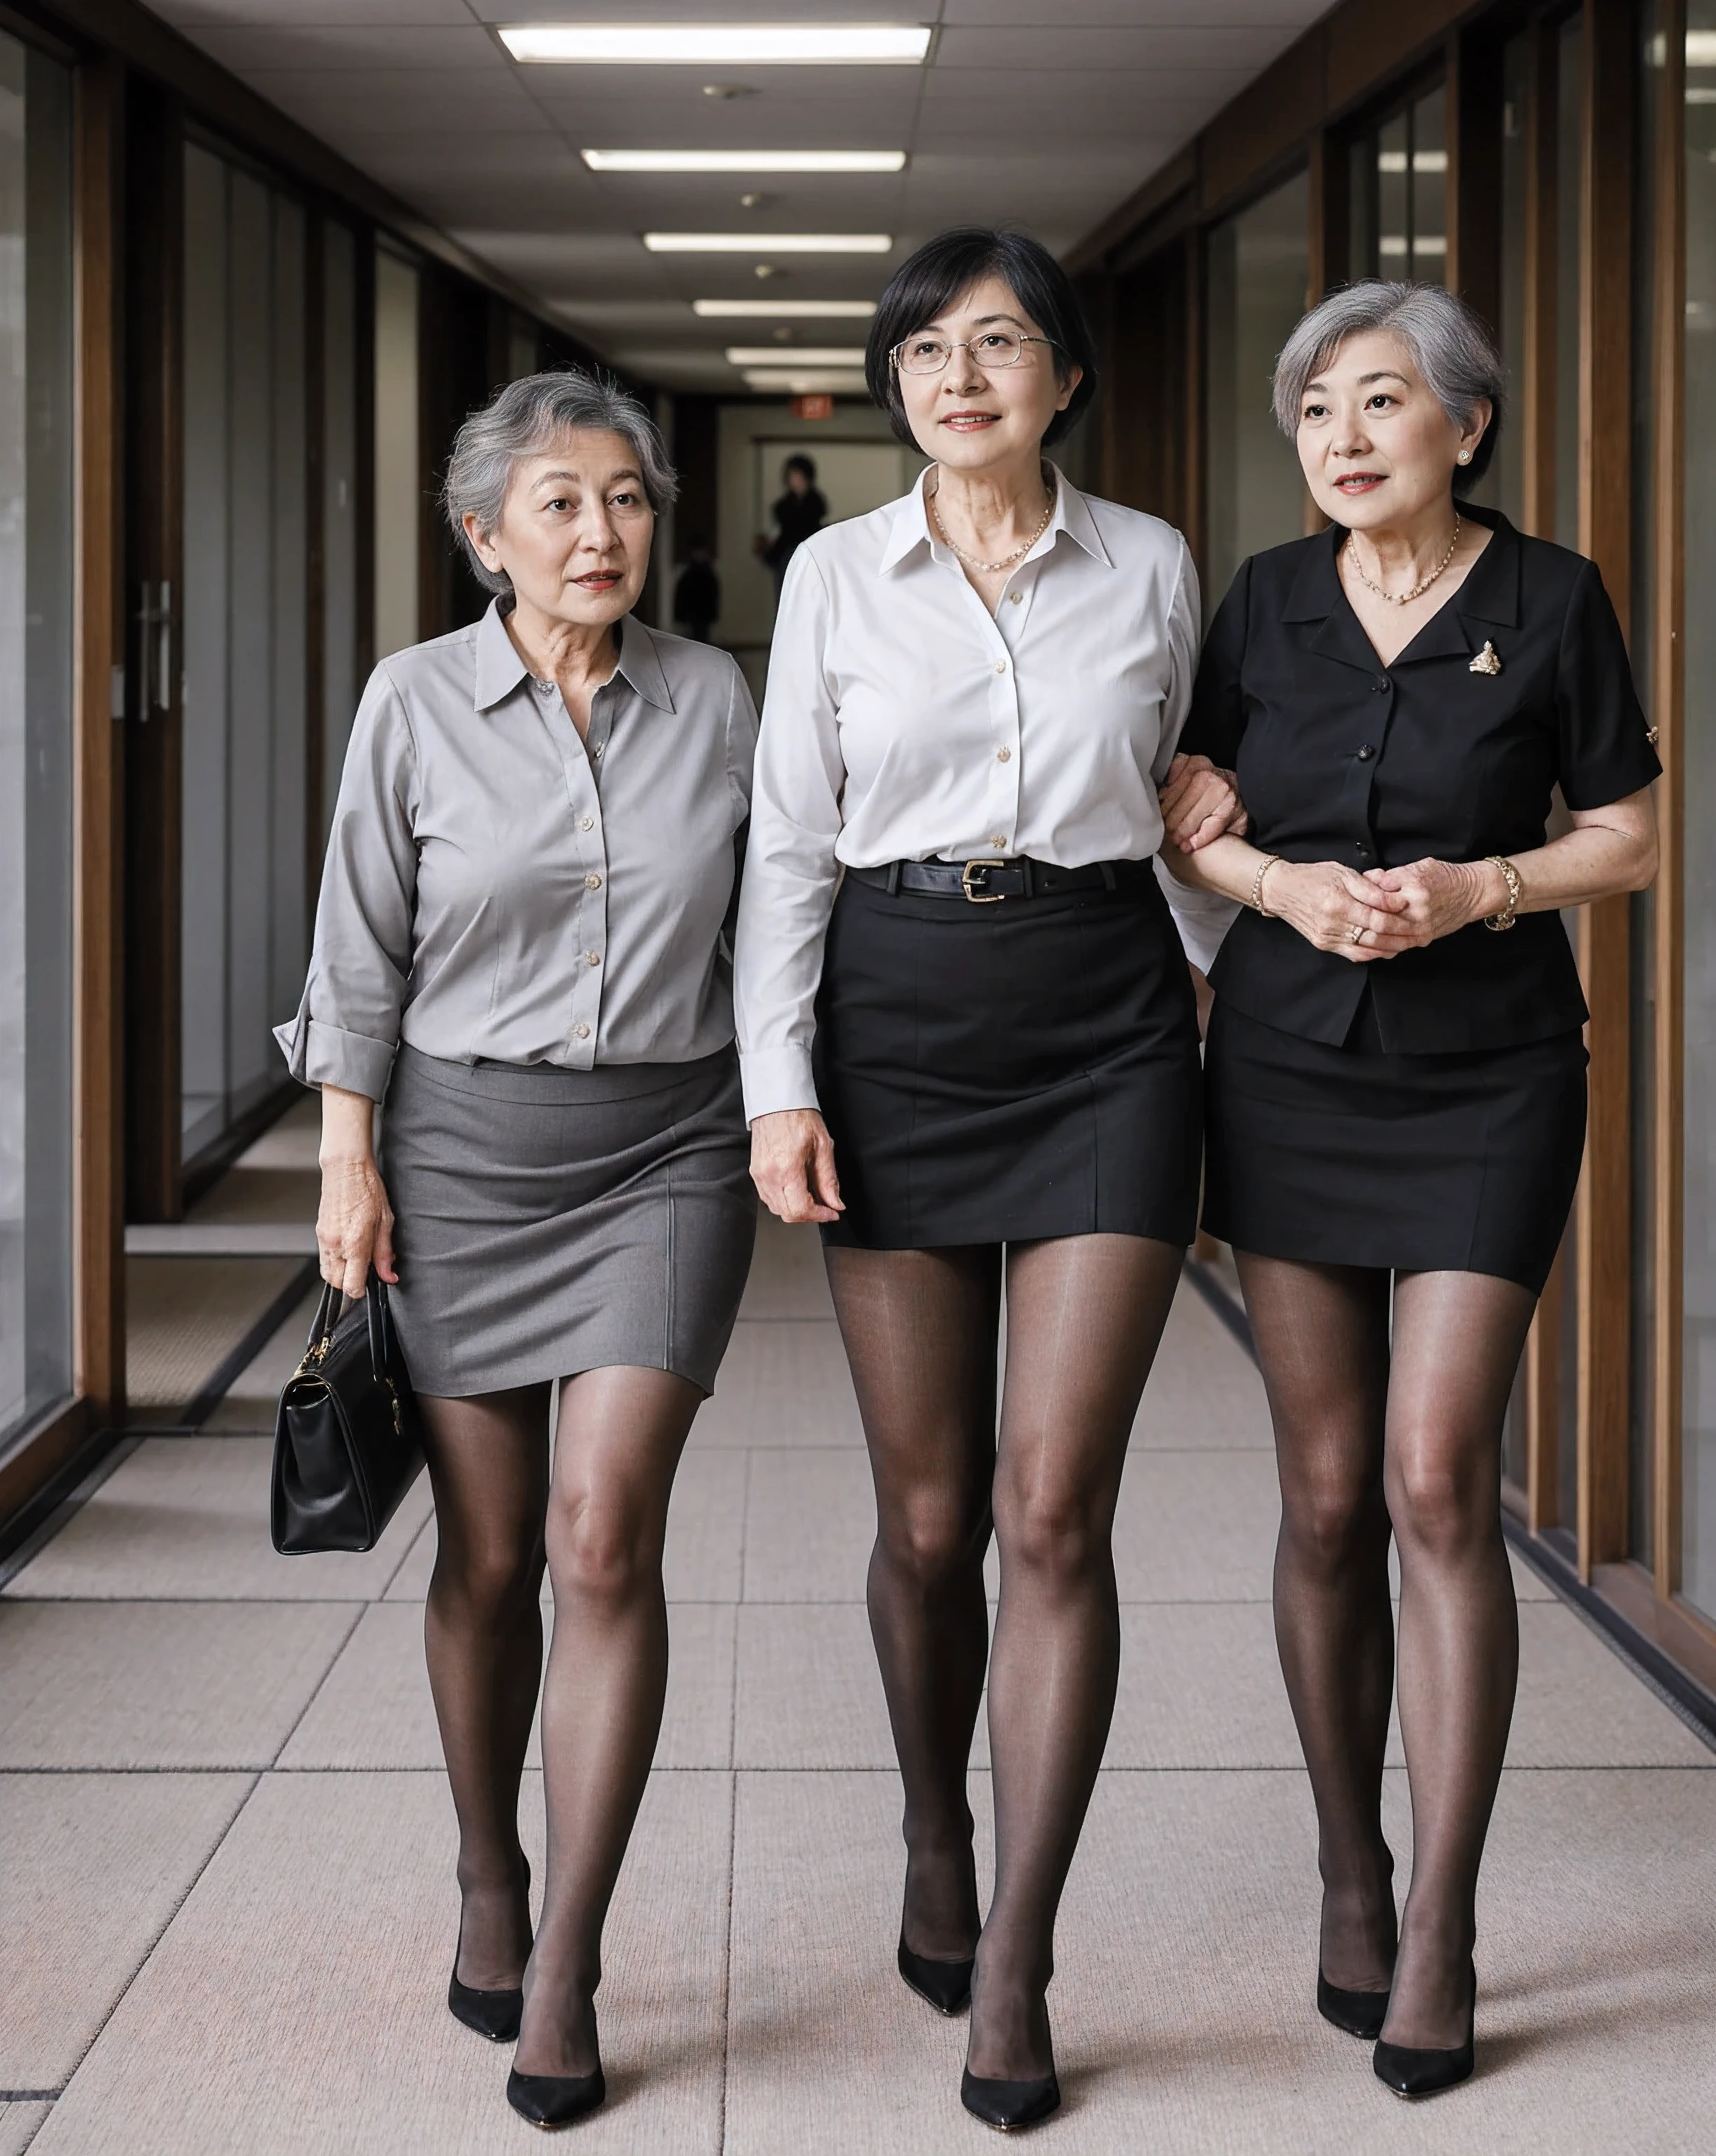 4 Japanese women, Mature, elderly, older, Asian, wearing , nerdy, Stunning proportions, grey sheer tights, best quality, nerdy old black office lady wearing an a white blouse and short black skirt, grandma with fat legs, full body, high heels, legs towering over you, standing